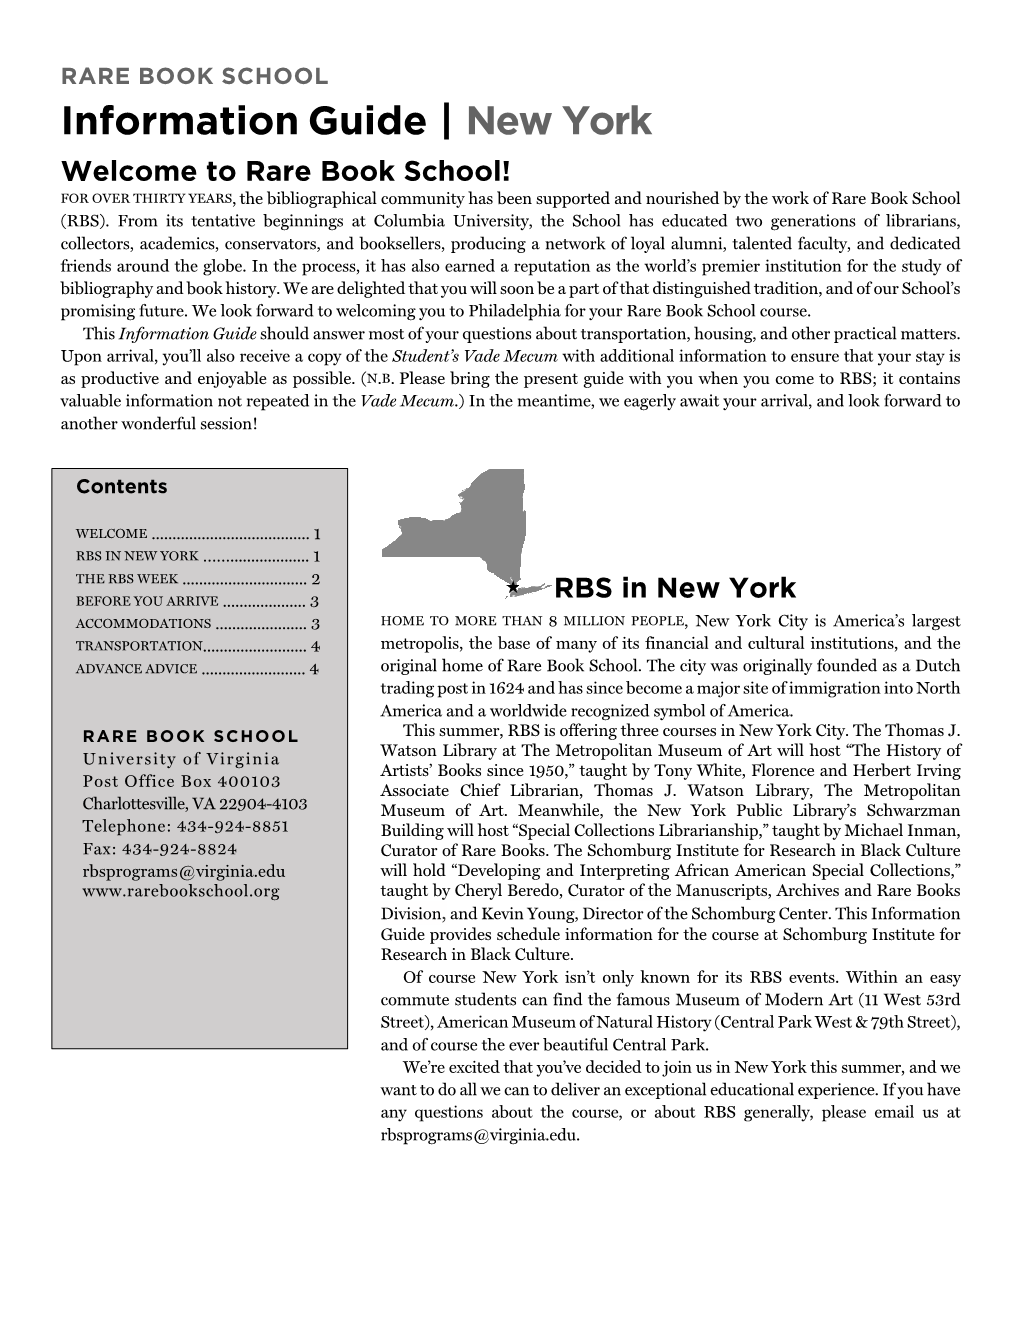 New York Welcome to Rare Book School! for OVER THIRTY YEARS, the Bibliographical Community Has Been Supported and Nourished by the Work of Rare Book School (RBS)